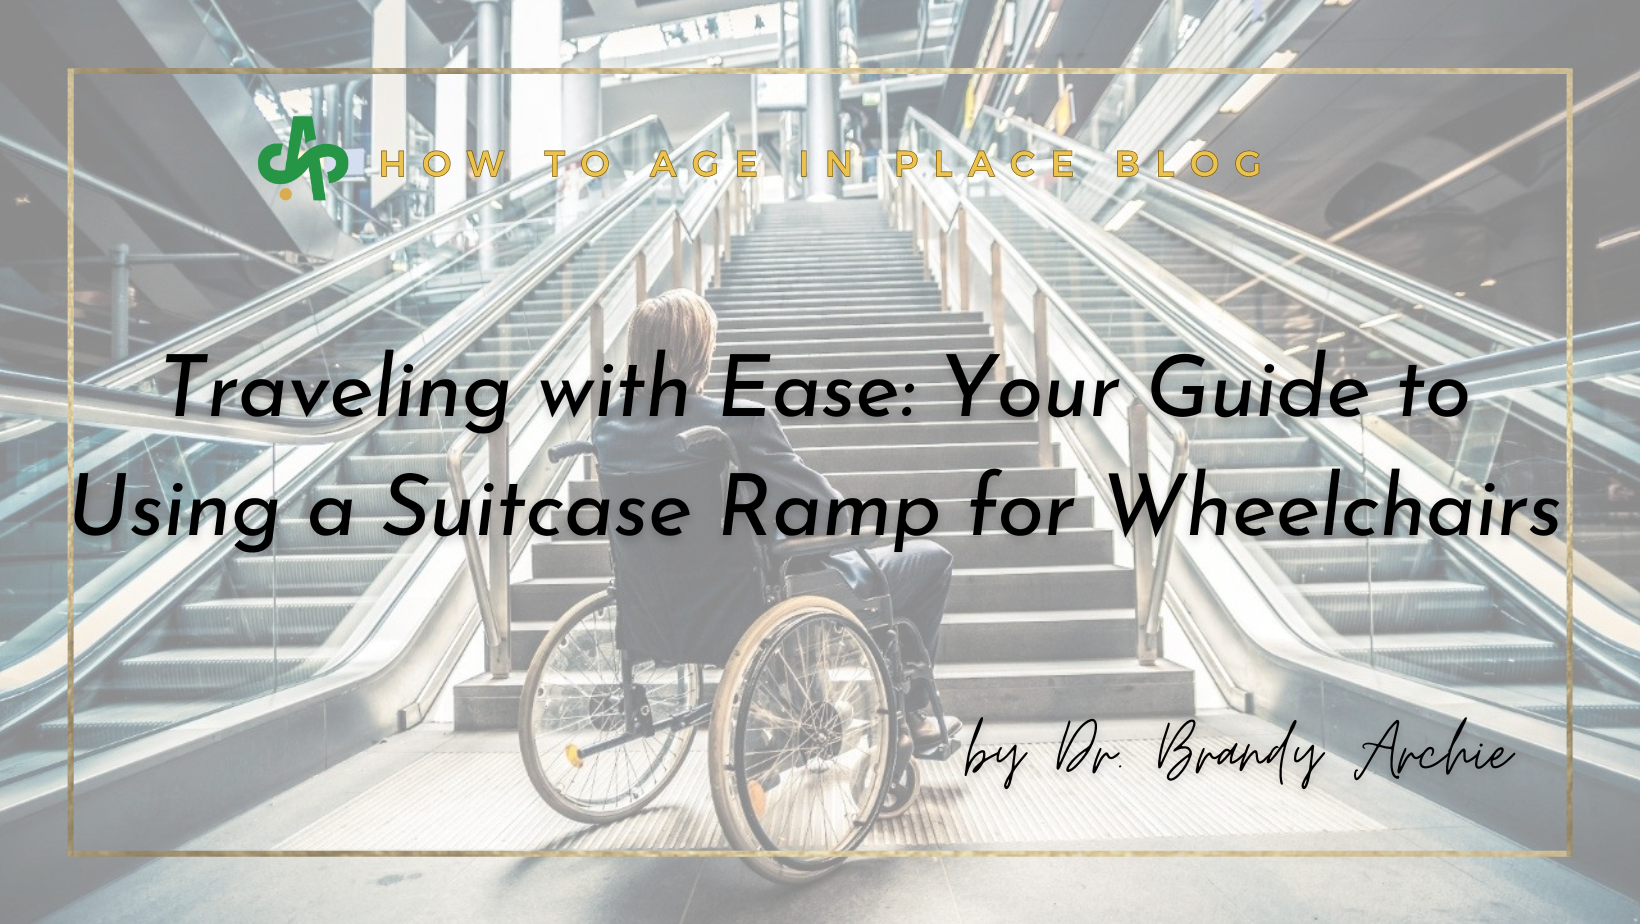 Traveling with Ease: Your Guide to Using a Suitcase Ramp for Wheelchairs